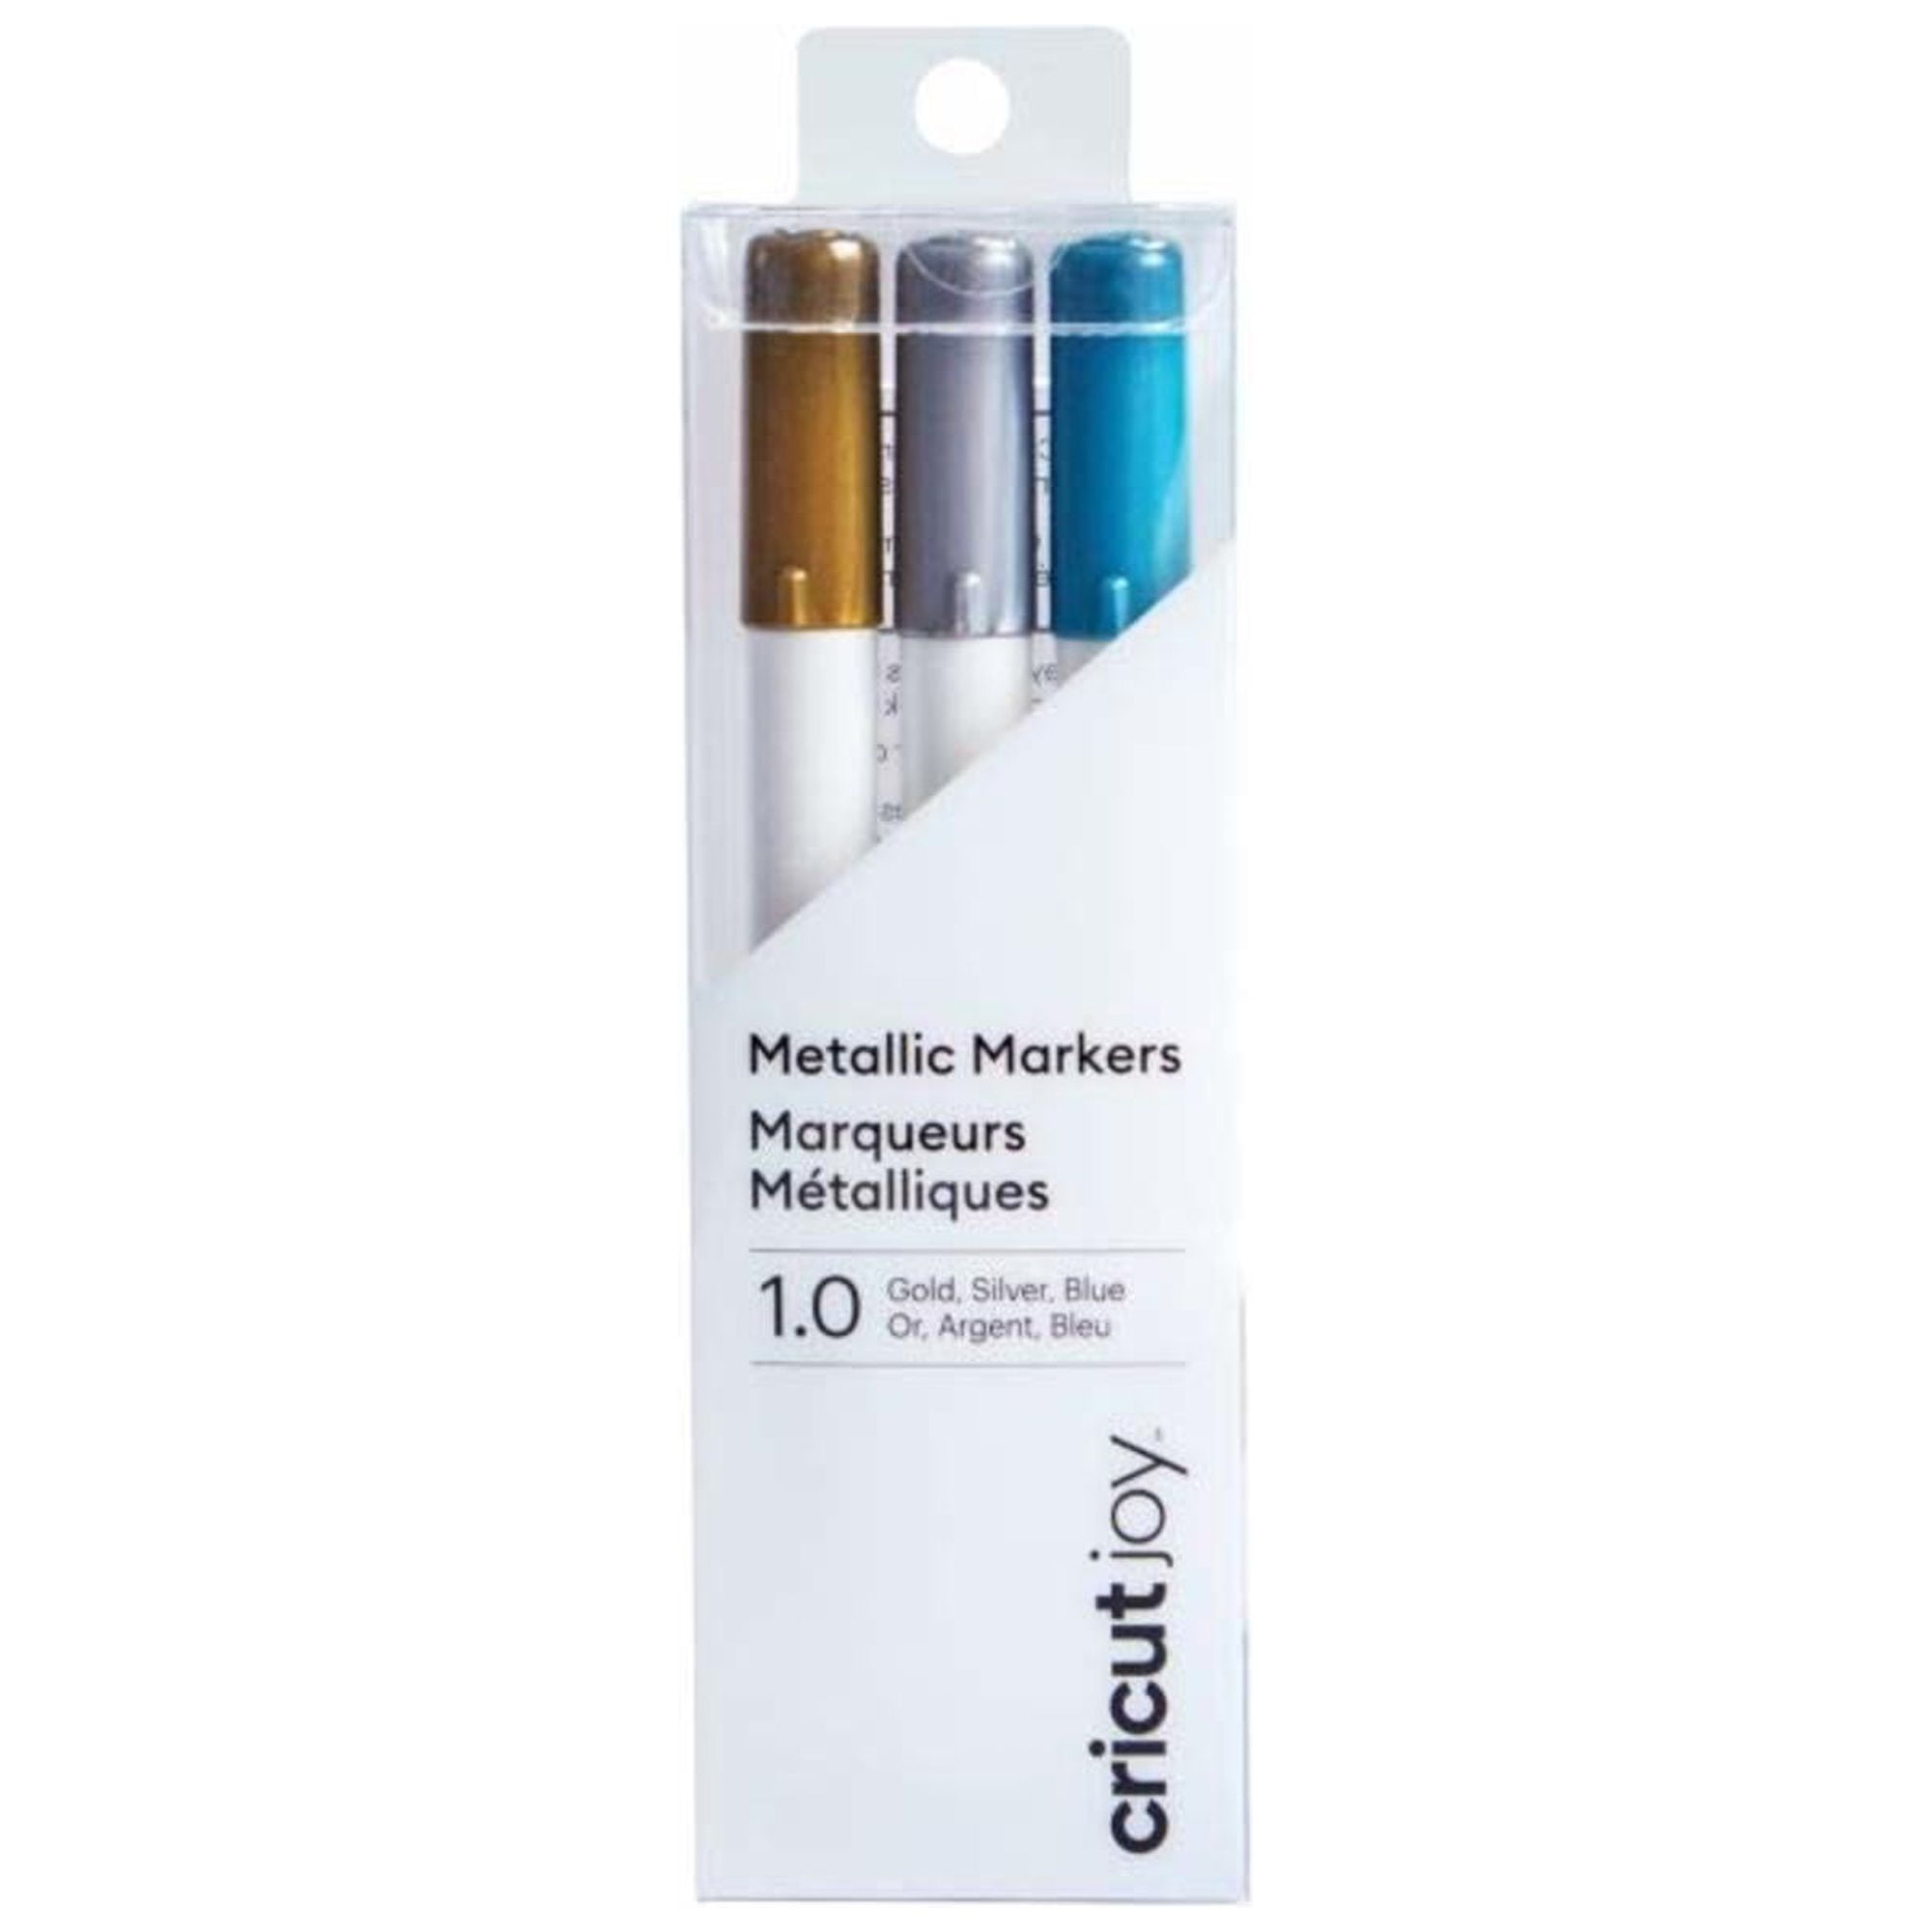 Cricut Joy Infusible Ink Markers - 1.0 (3) Wild Aster, Bright Teal, Pa